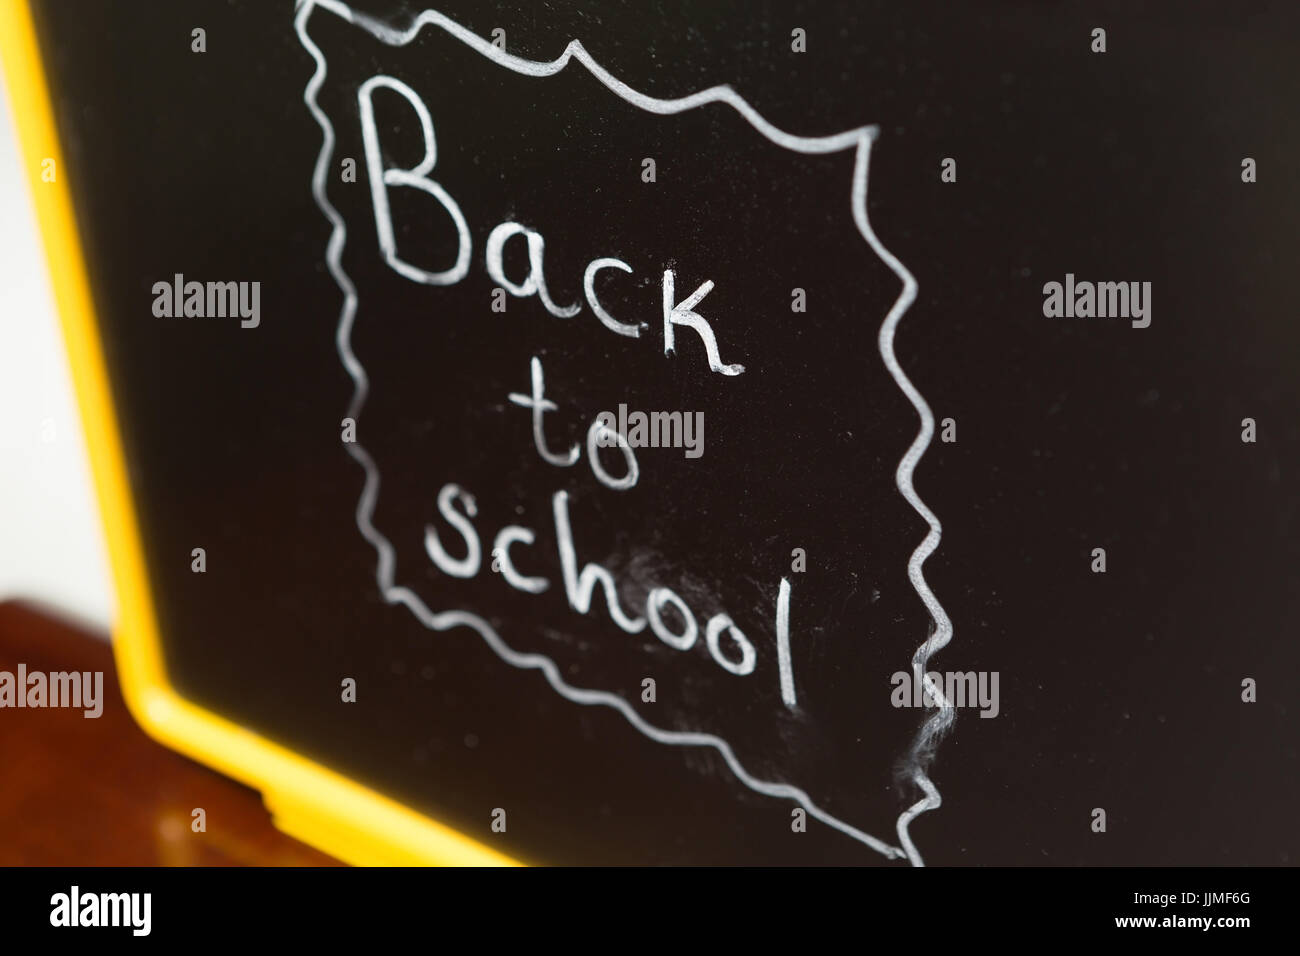 Back to School Writing on the Chalkboard Stock Photo